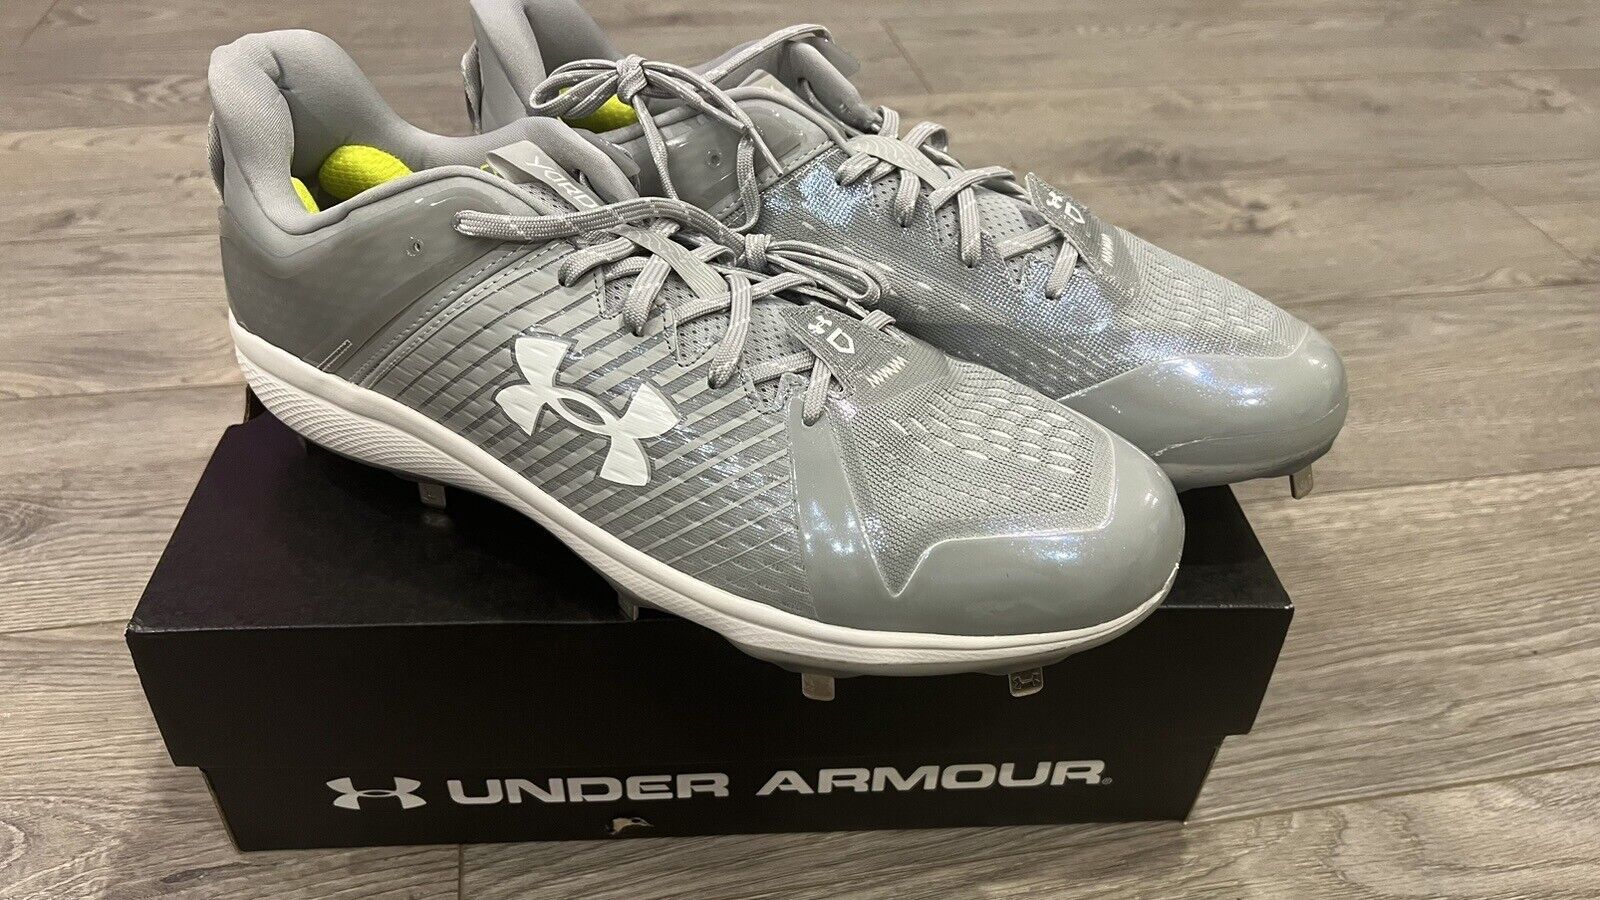 Primary image for Under Armour Men's UA Yard Low MT Gray Baseball Cleat Shoe, Size 16